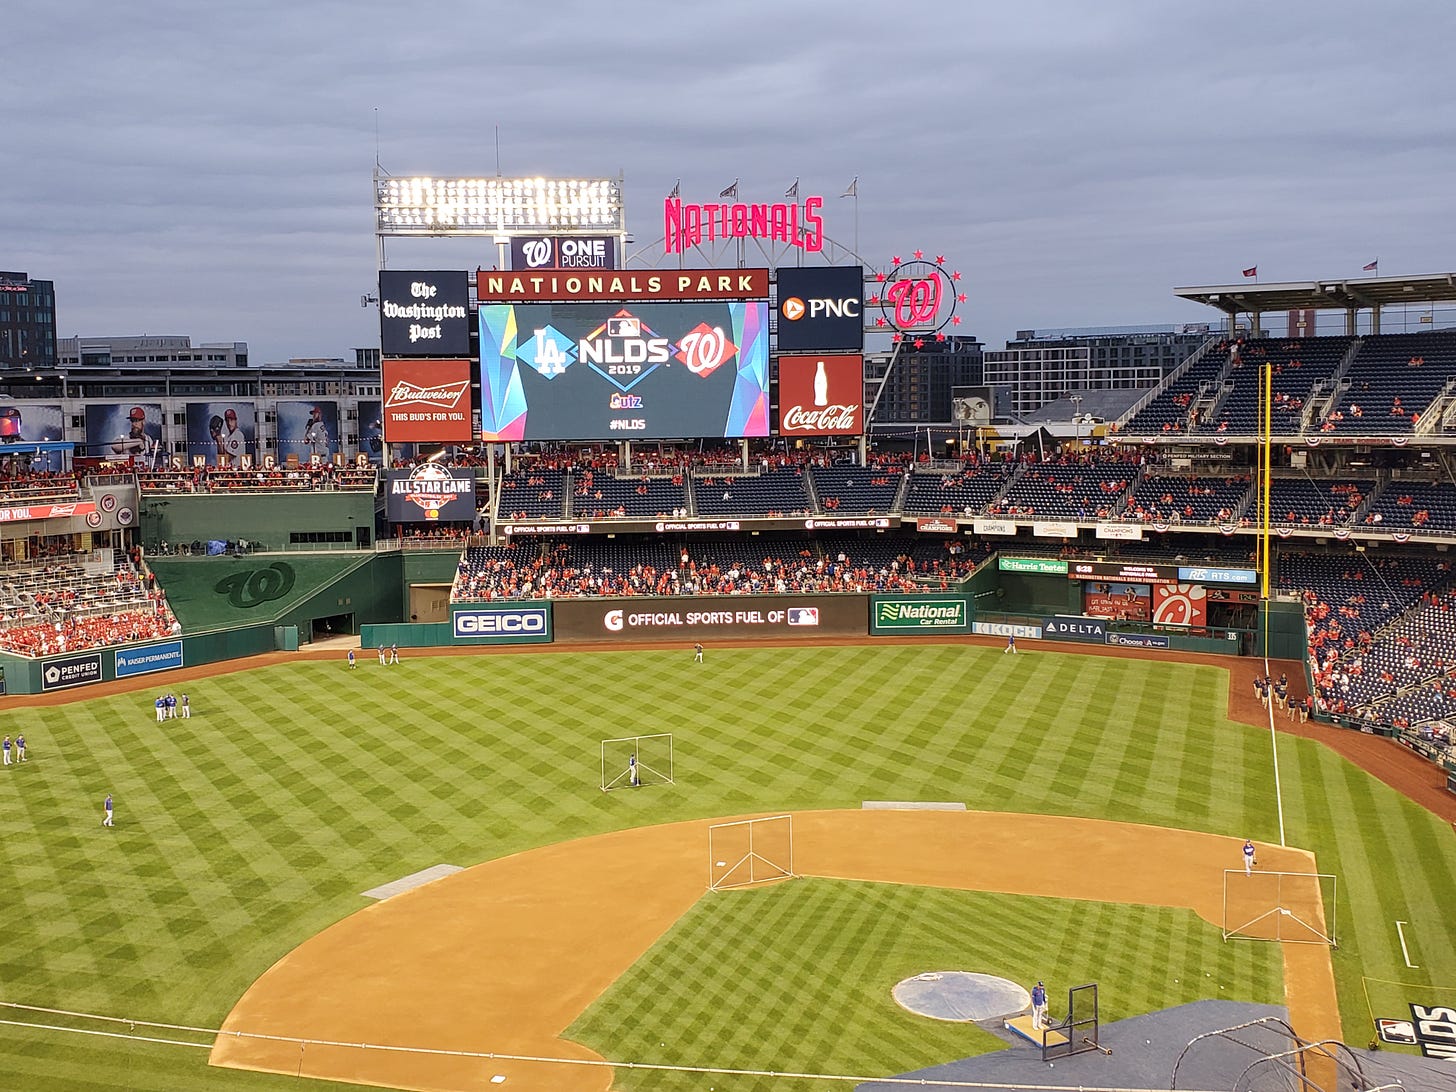 The view from pre-game batting practice at Nationals Park at Game 3 of the National League Division Series on October 6, 2019.